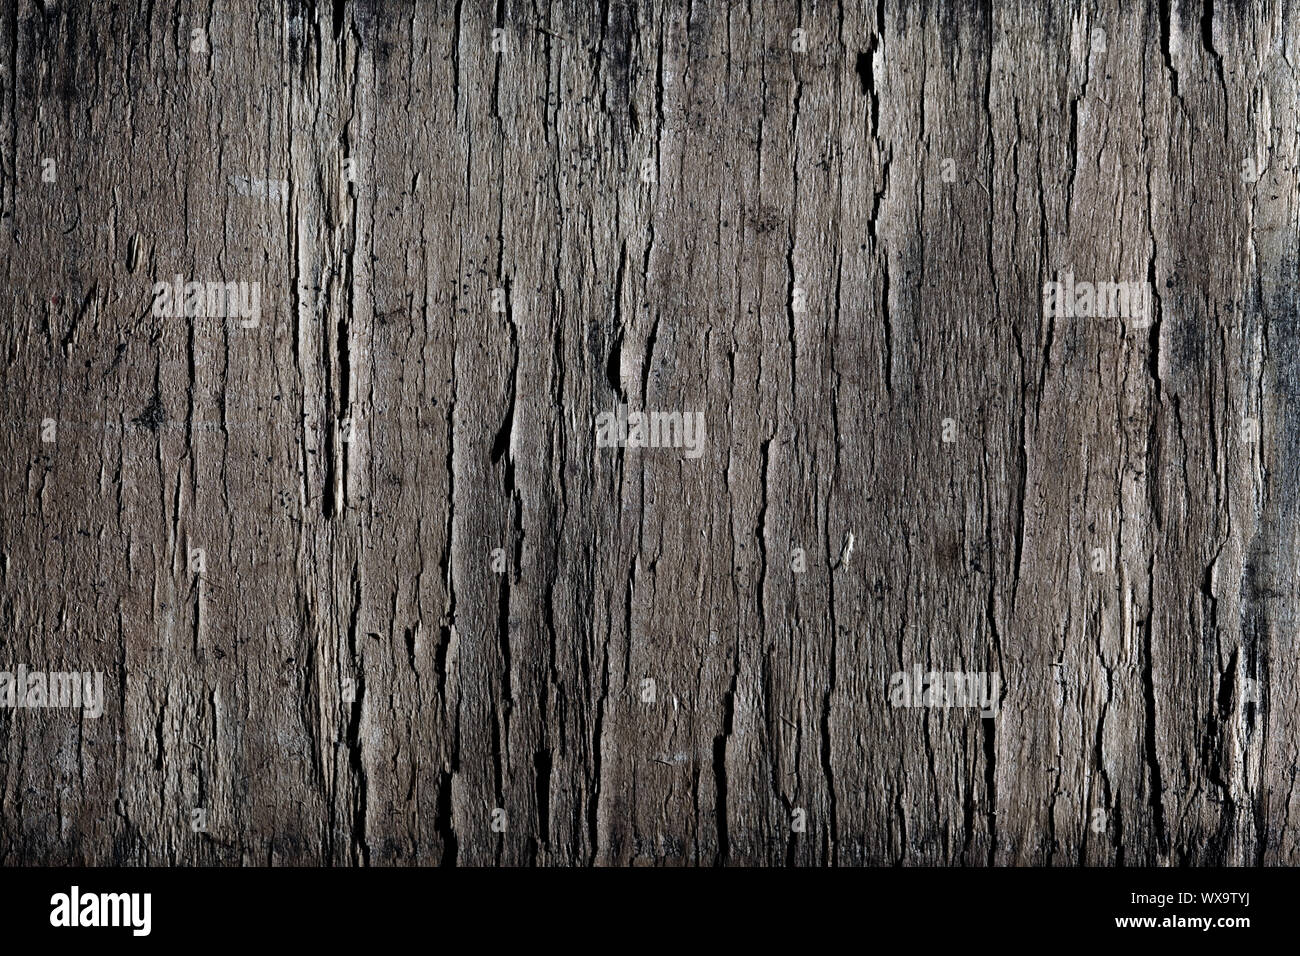 Worn wooden background or texture Stock Photo